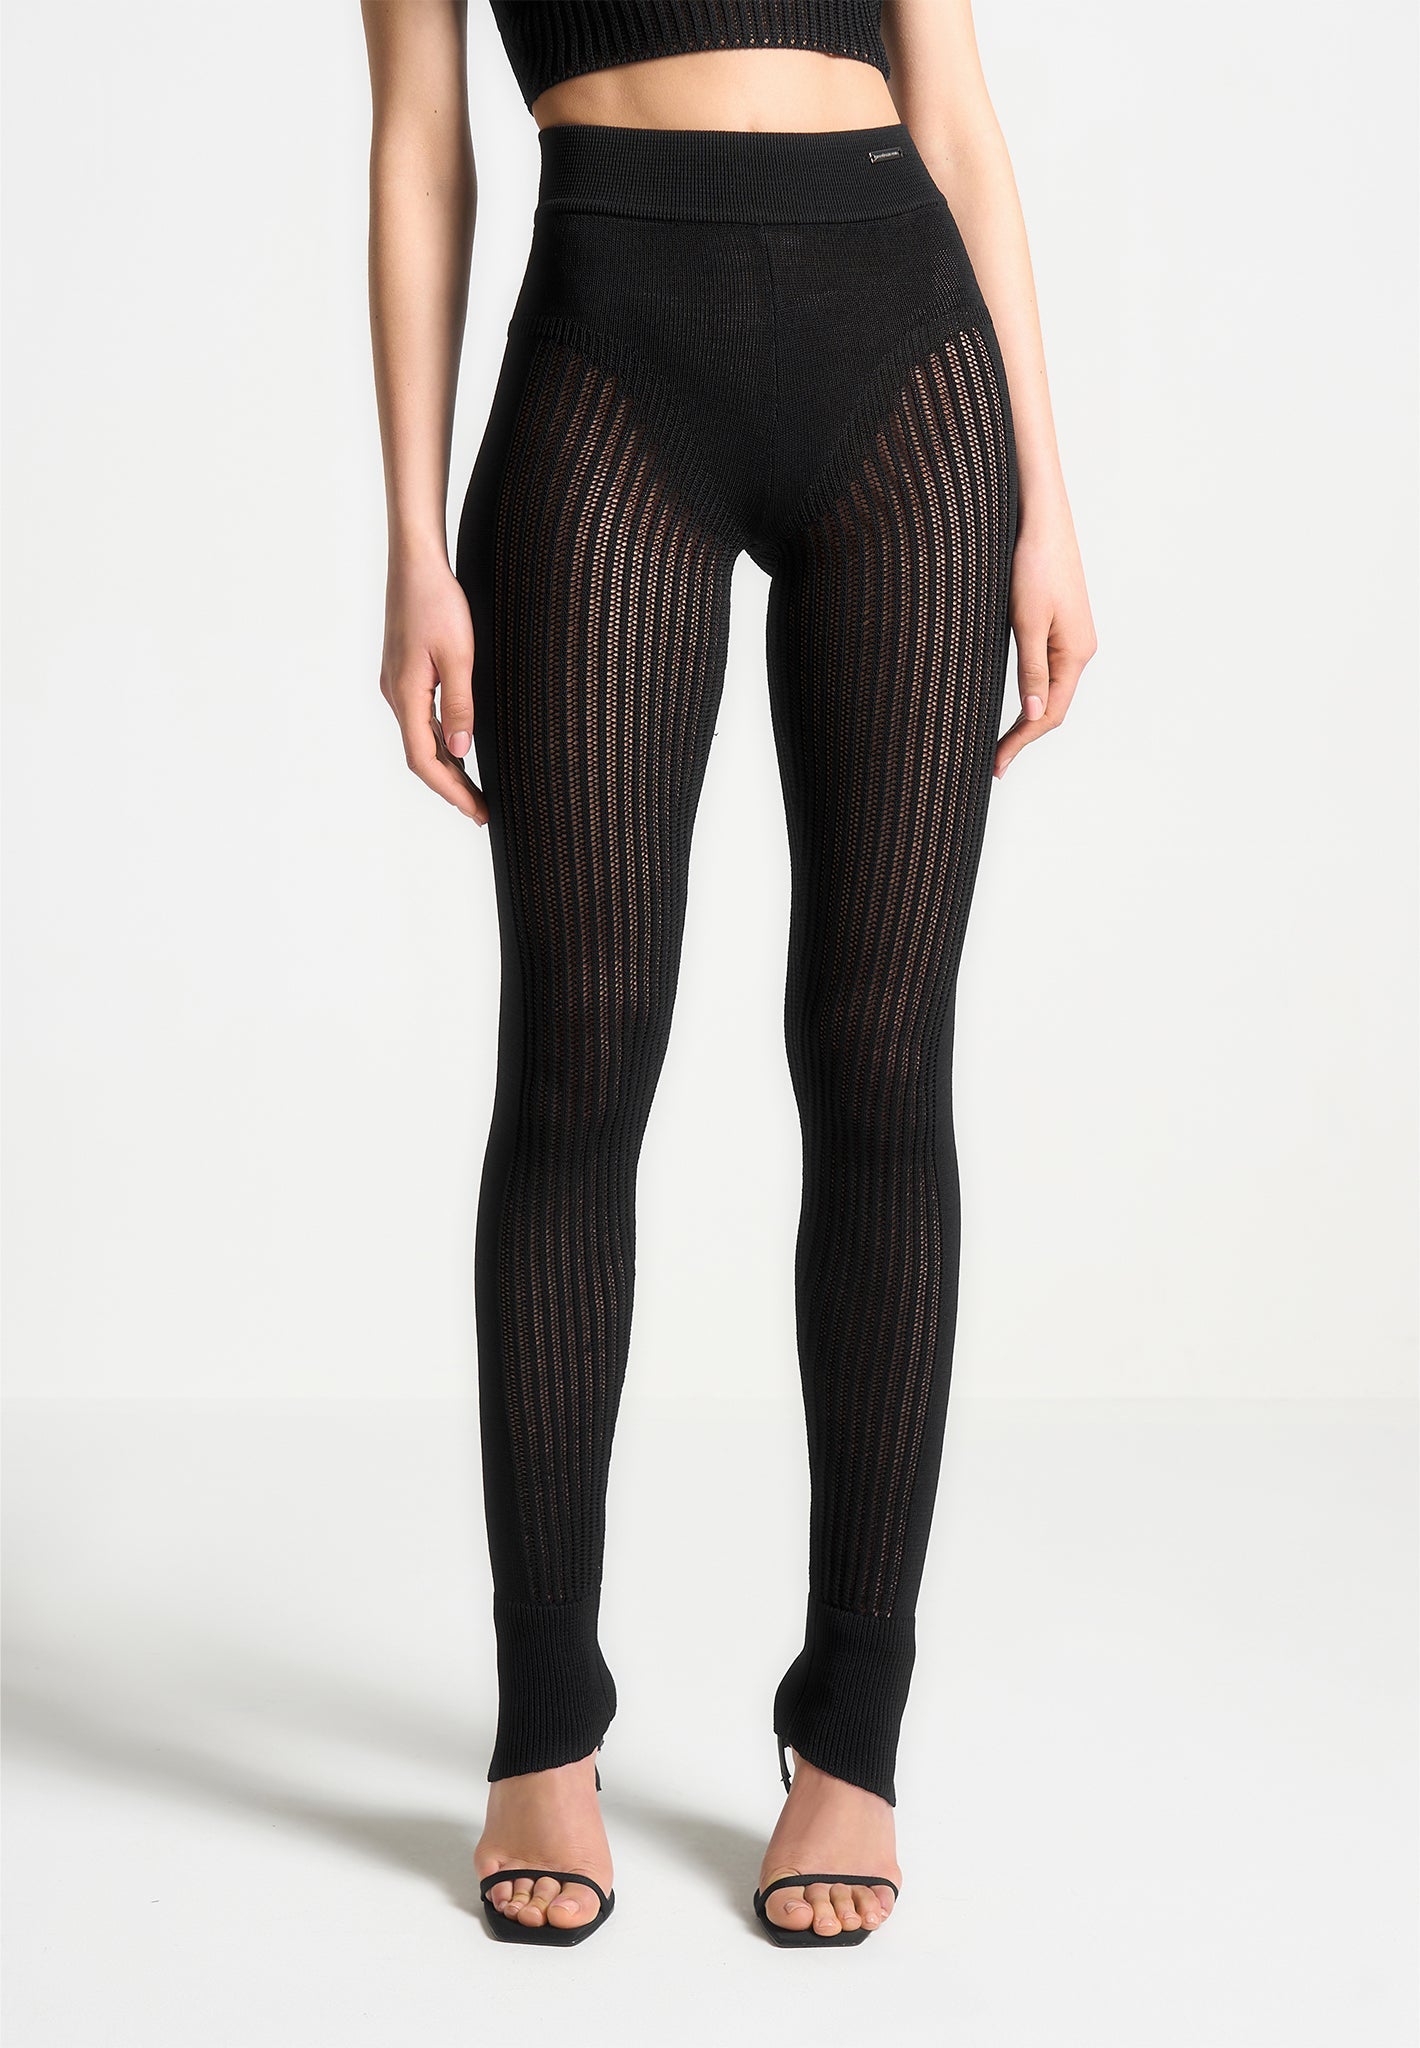 Black Pleated Leggings by Recto on Sale